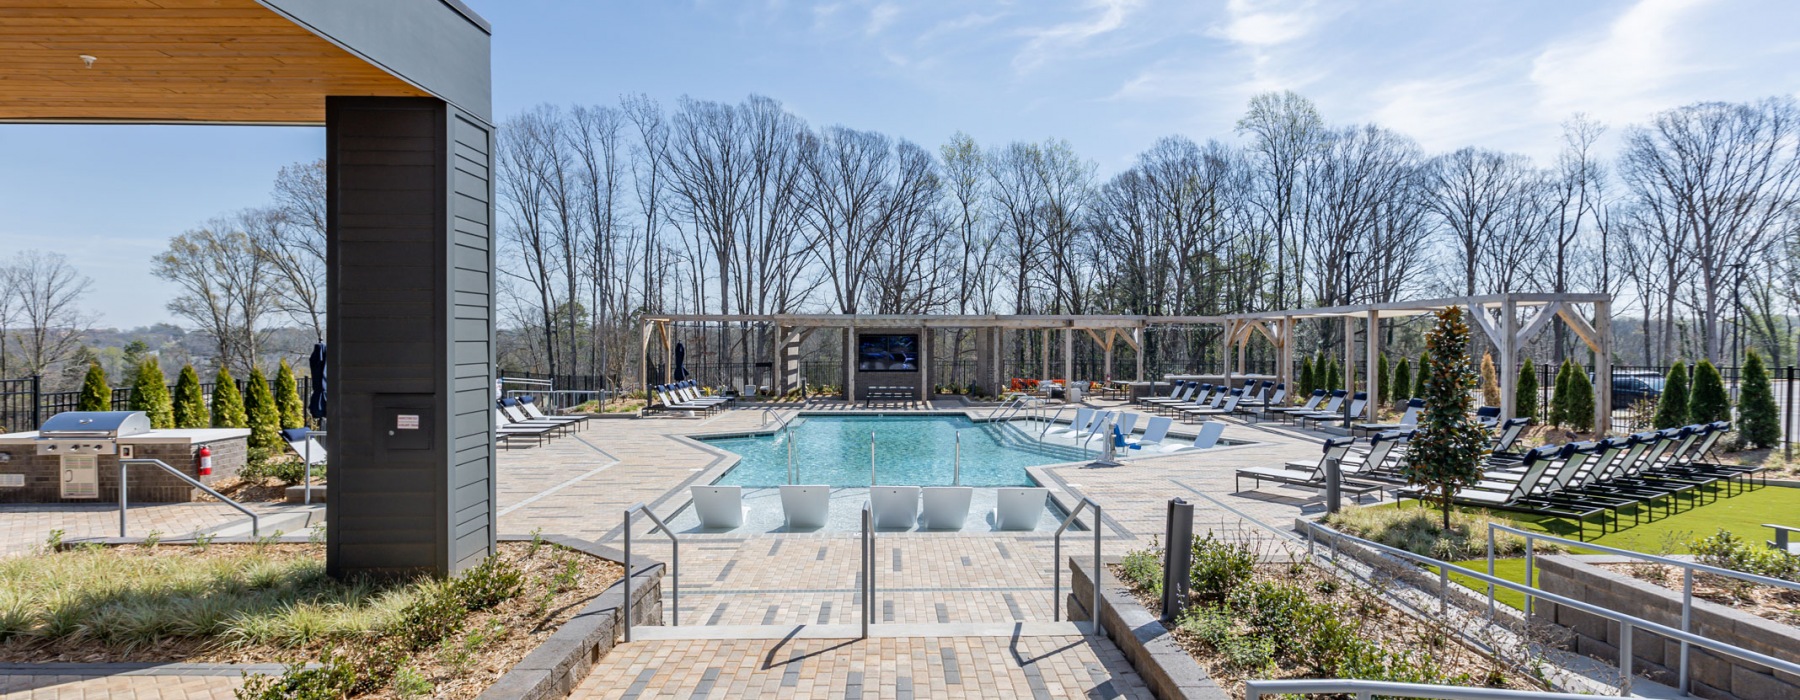 pool with patio seating wellen charlotte nc